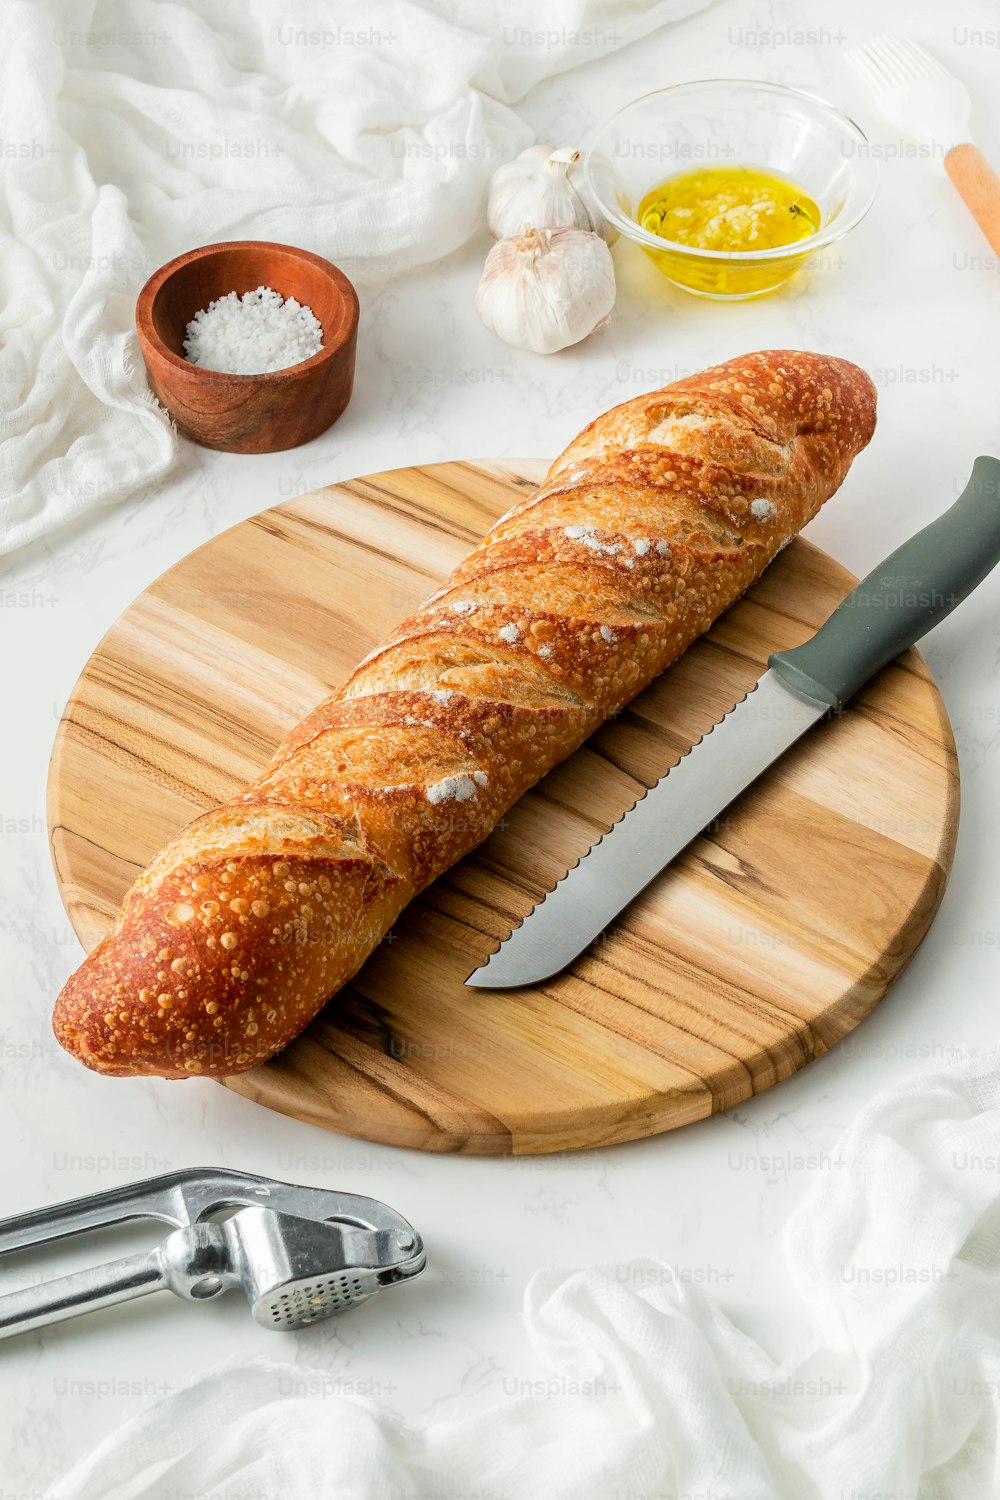 Premium Photo  Sliced french baguette on a wooden board on a